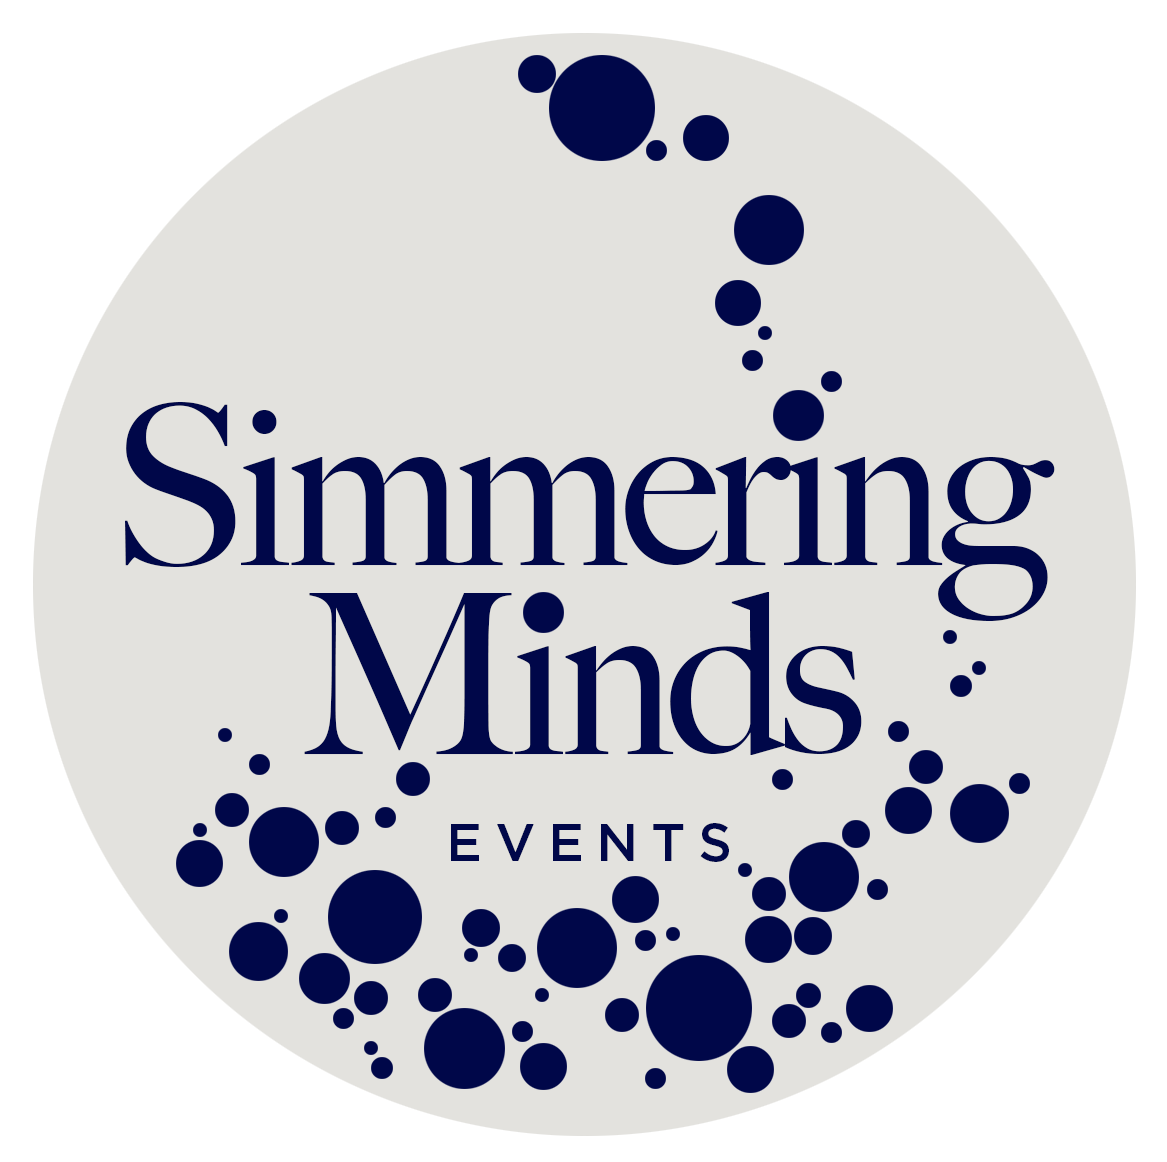 Simmering Minds